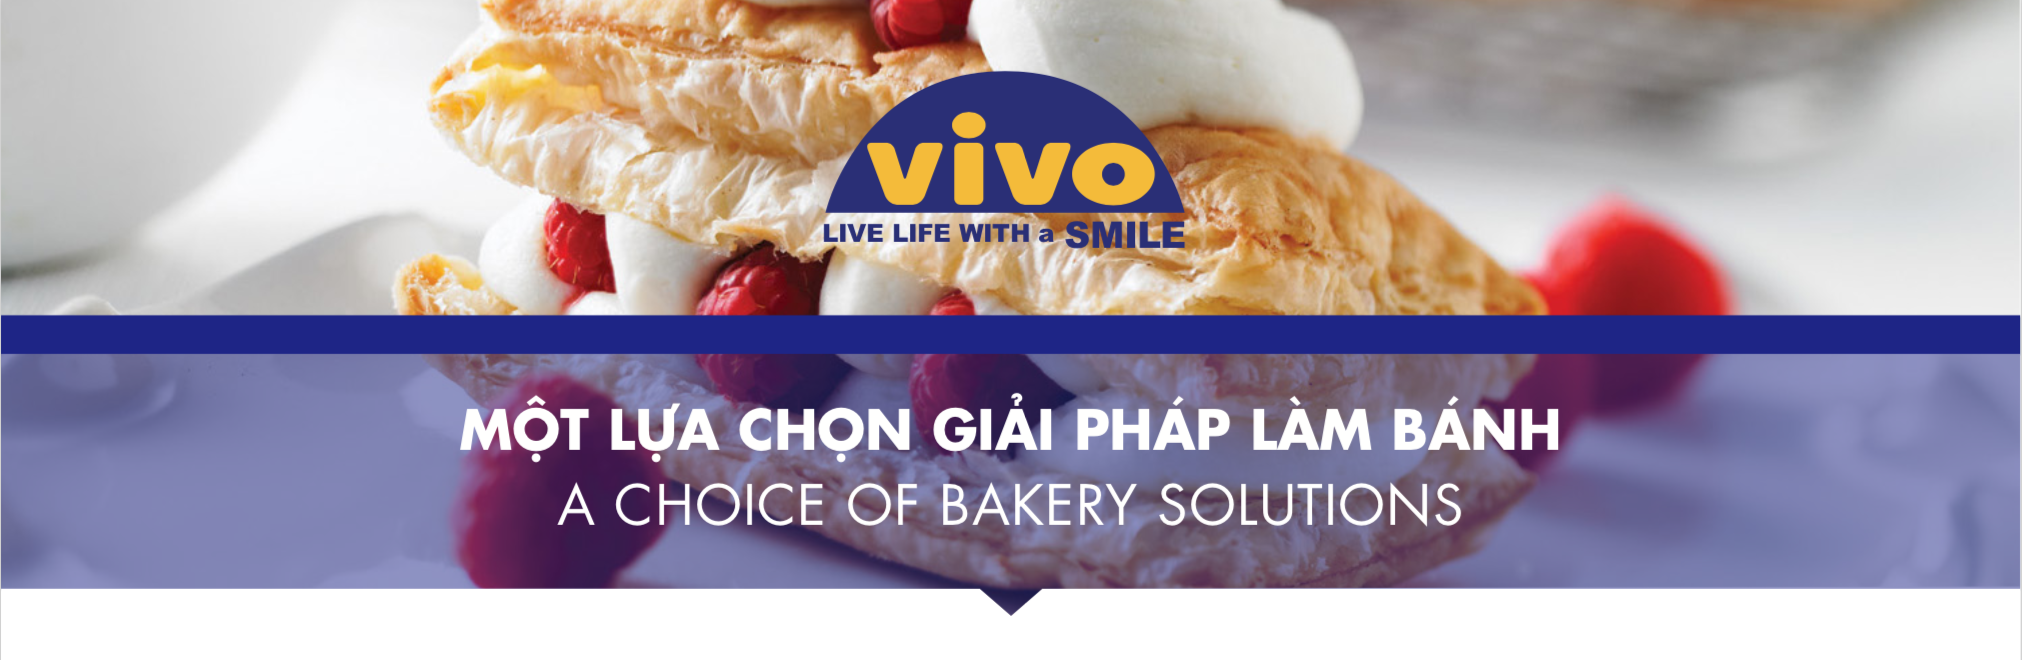 VIVO – A CHOICE OF BAKERY SOLUTIONS  